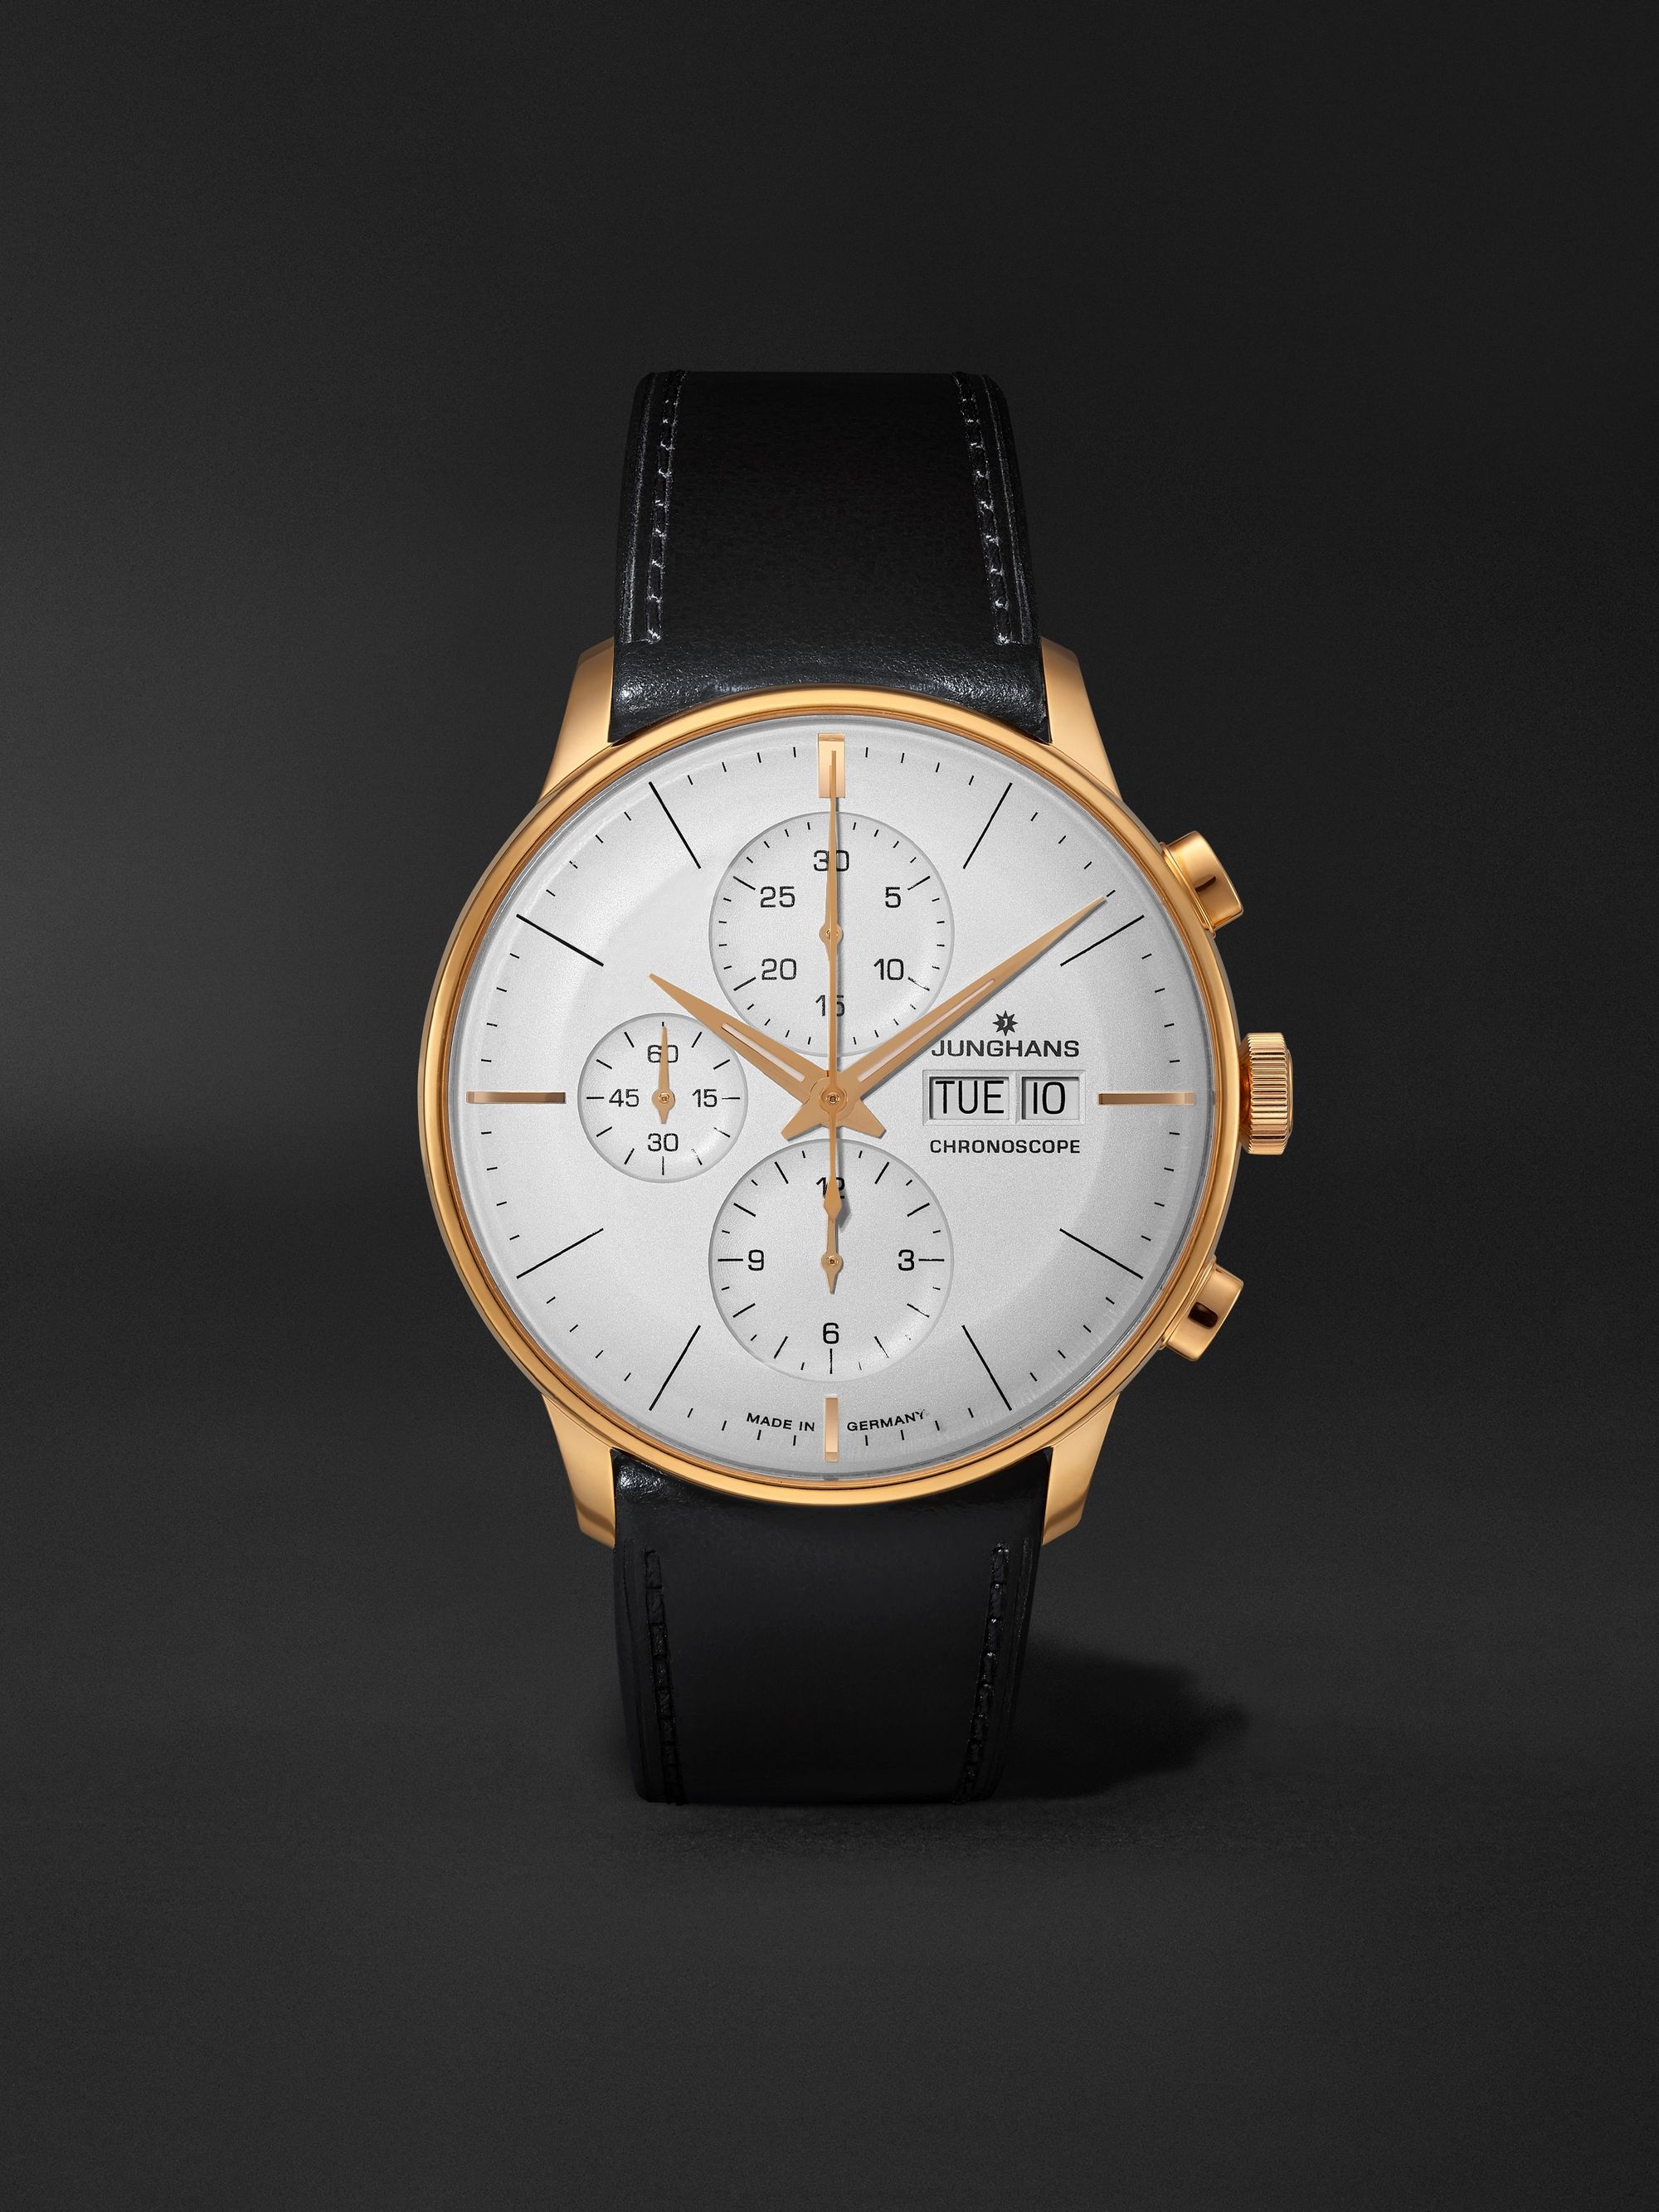 JUNGHANS Meister Chronoscope Automatic 41mm PVD-Coated Stainless Steel and Leather Watch, Ref. No. 027/7023.01